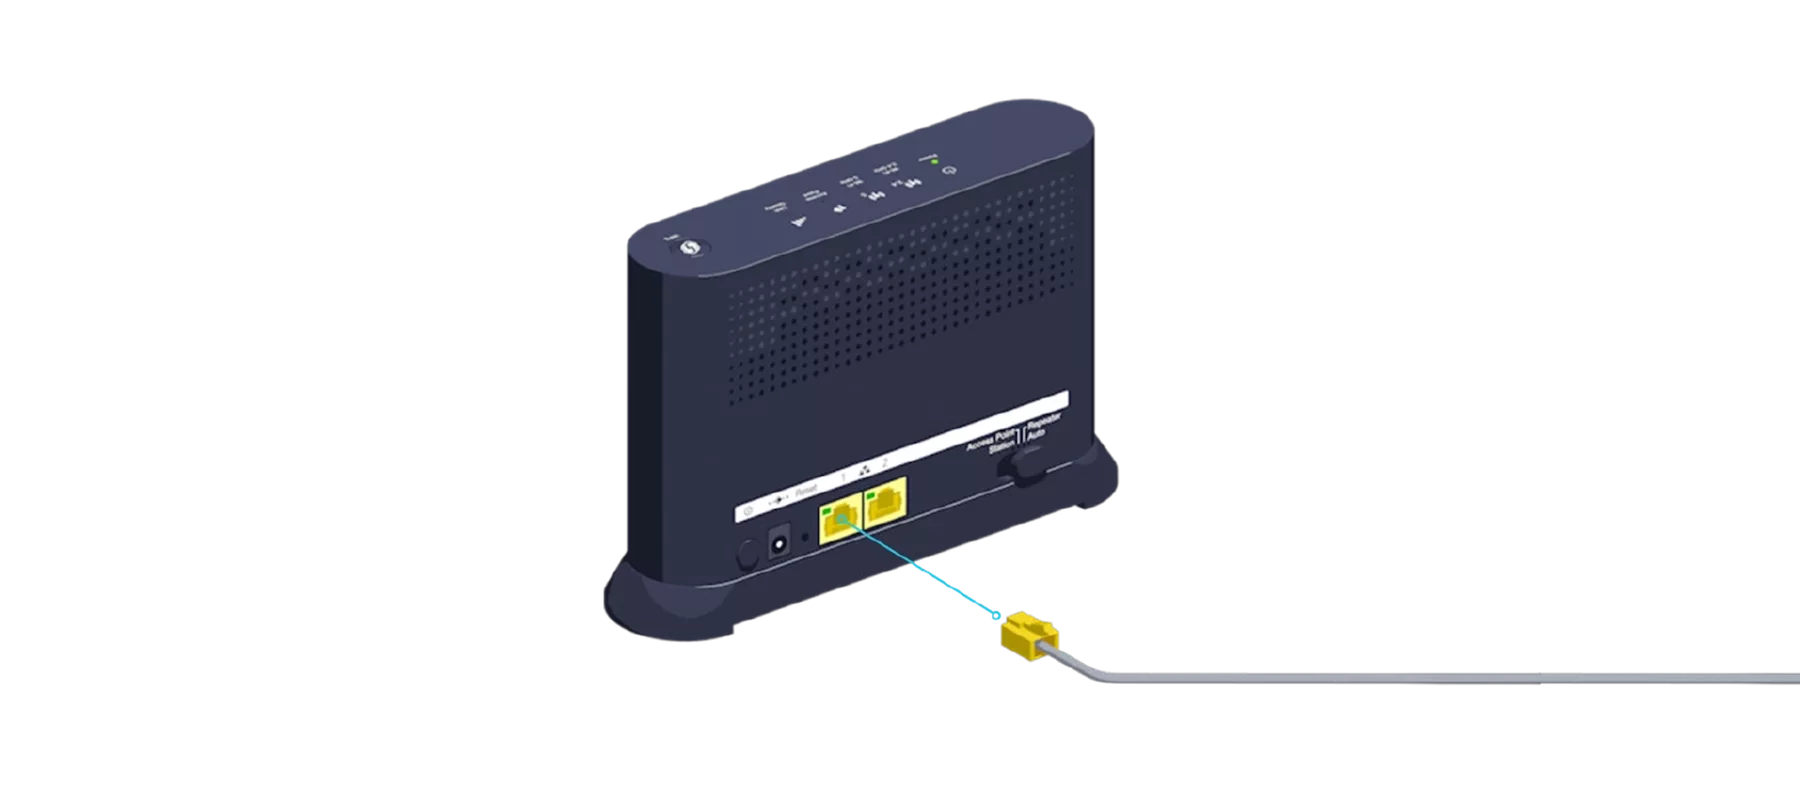 Wi-Fi Booster - Guide d'installation